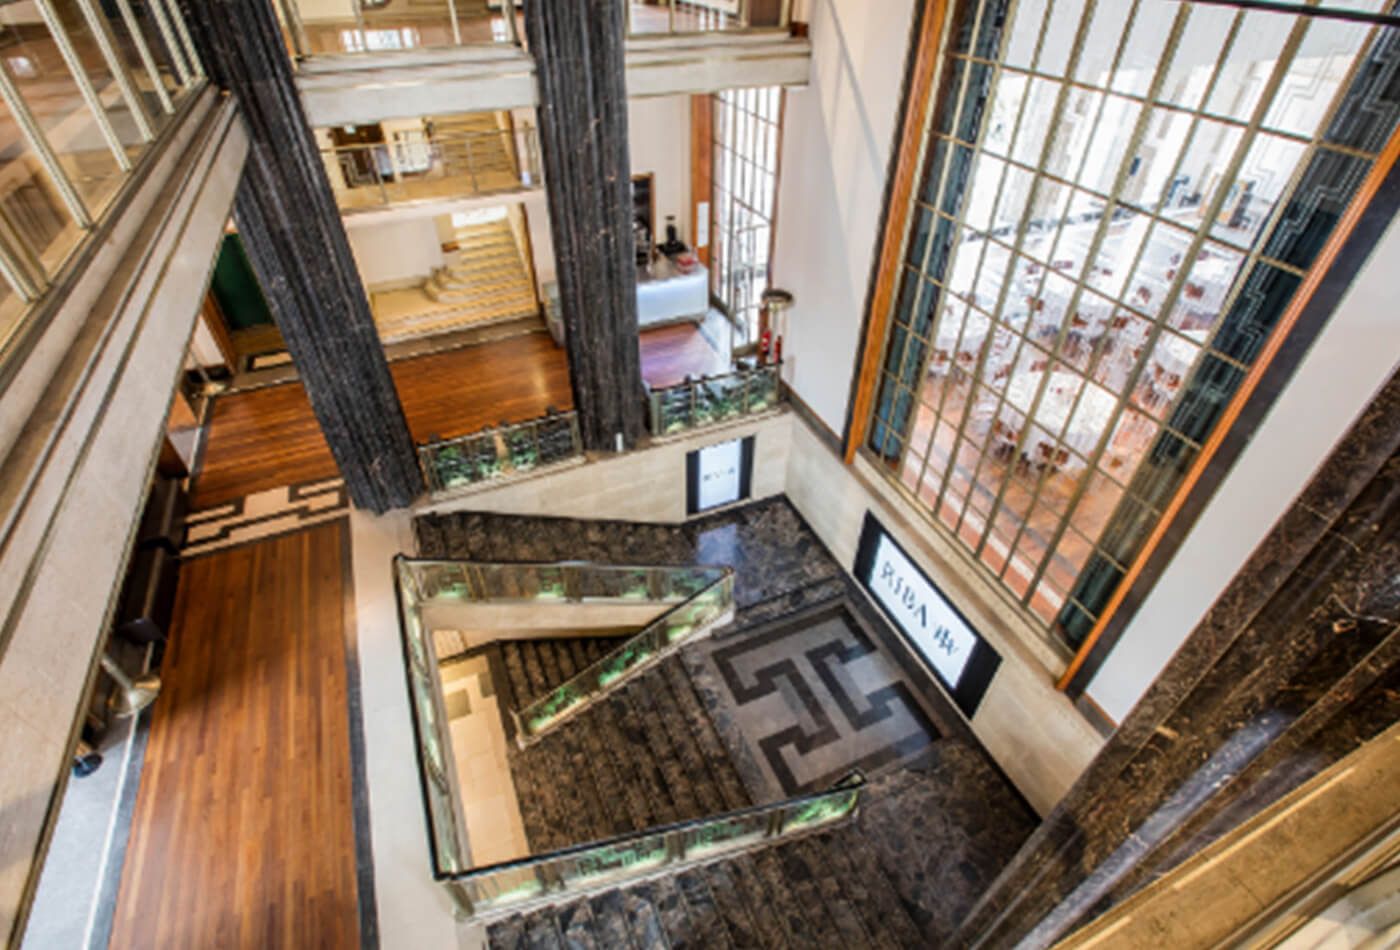 Grand entrance with wood flooring, vast glass windows and lots of stairs